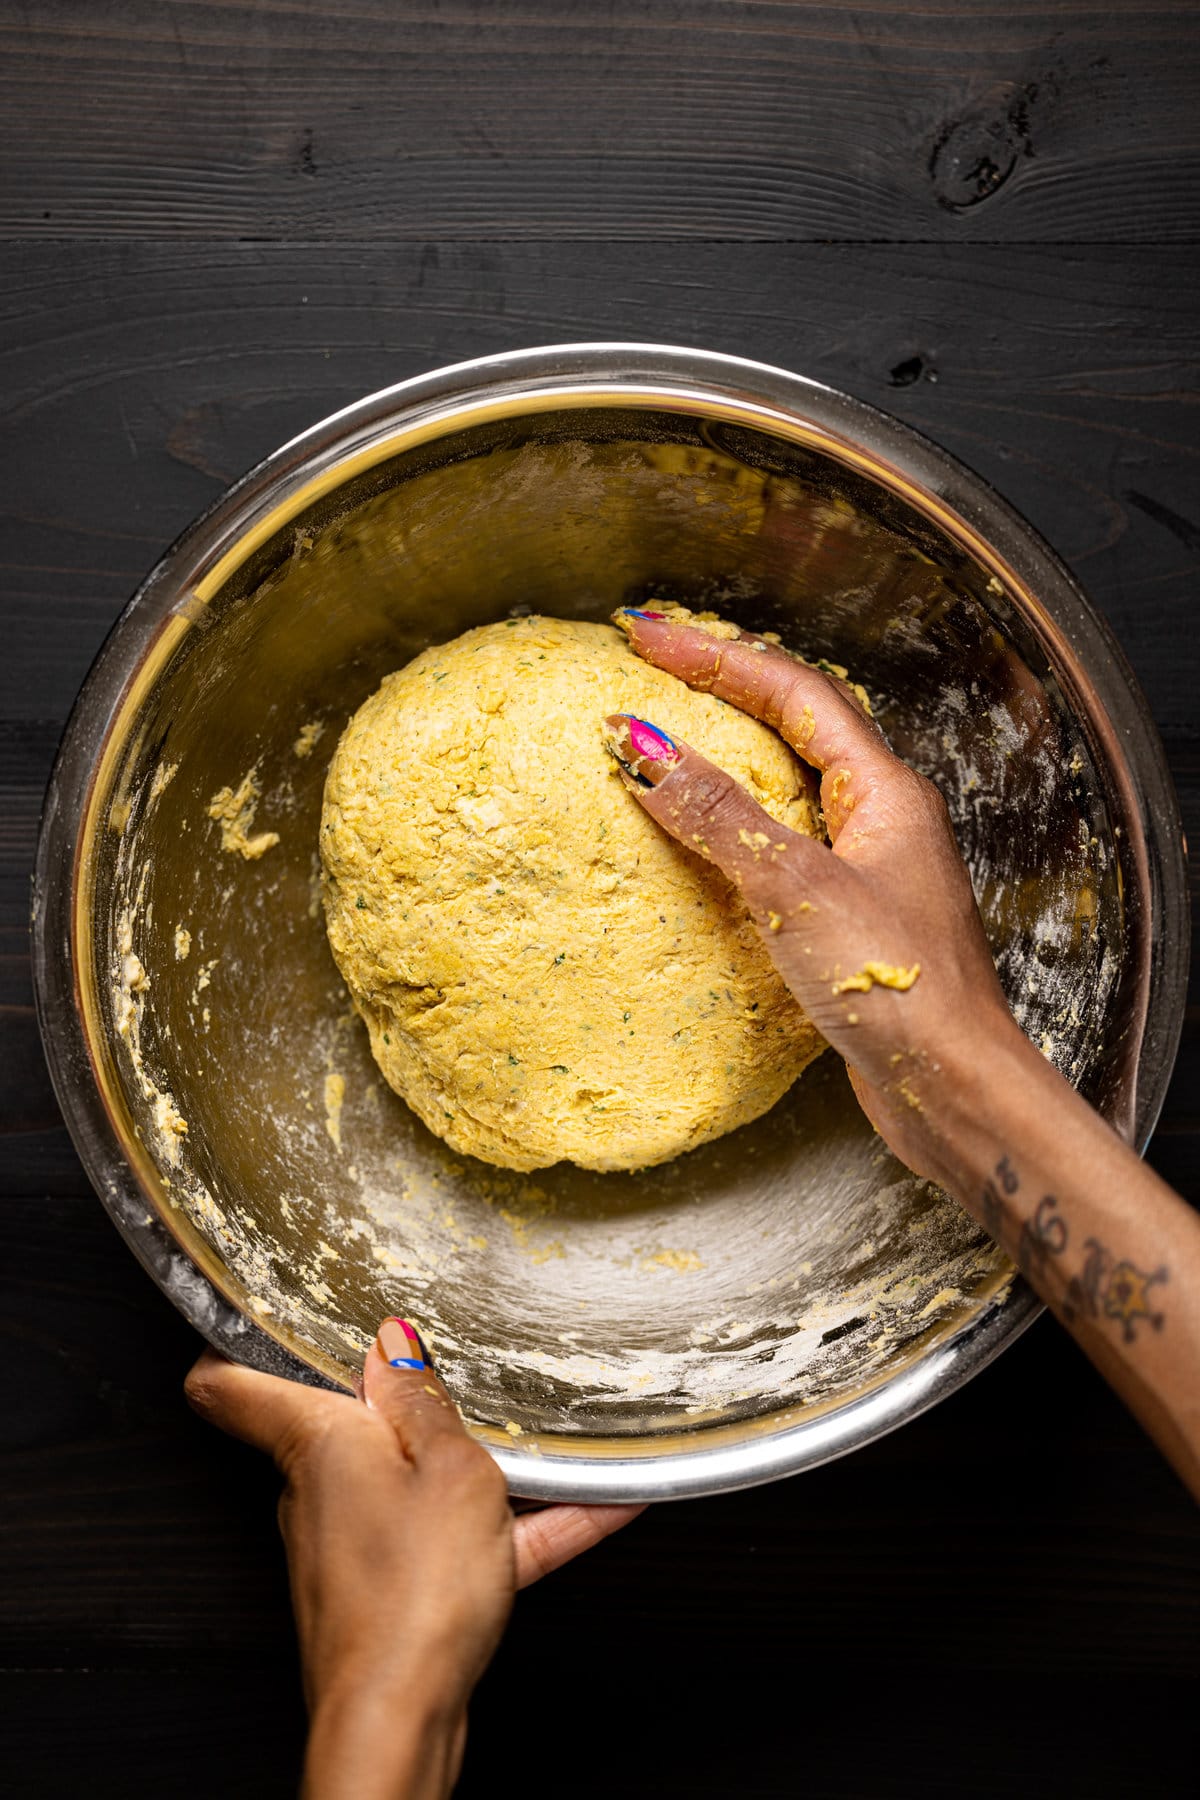 Hand on a ball of dough in a bowl